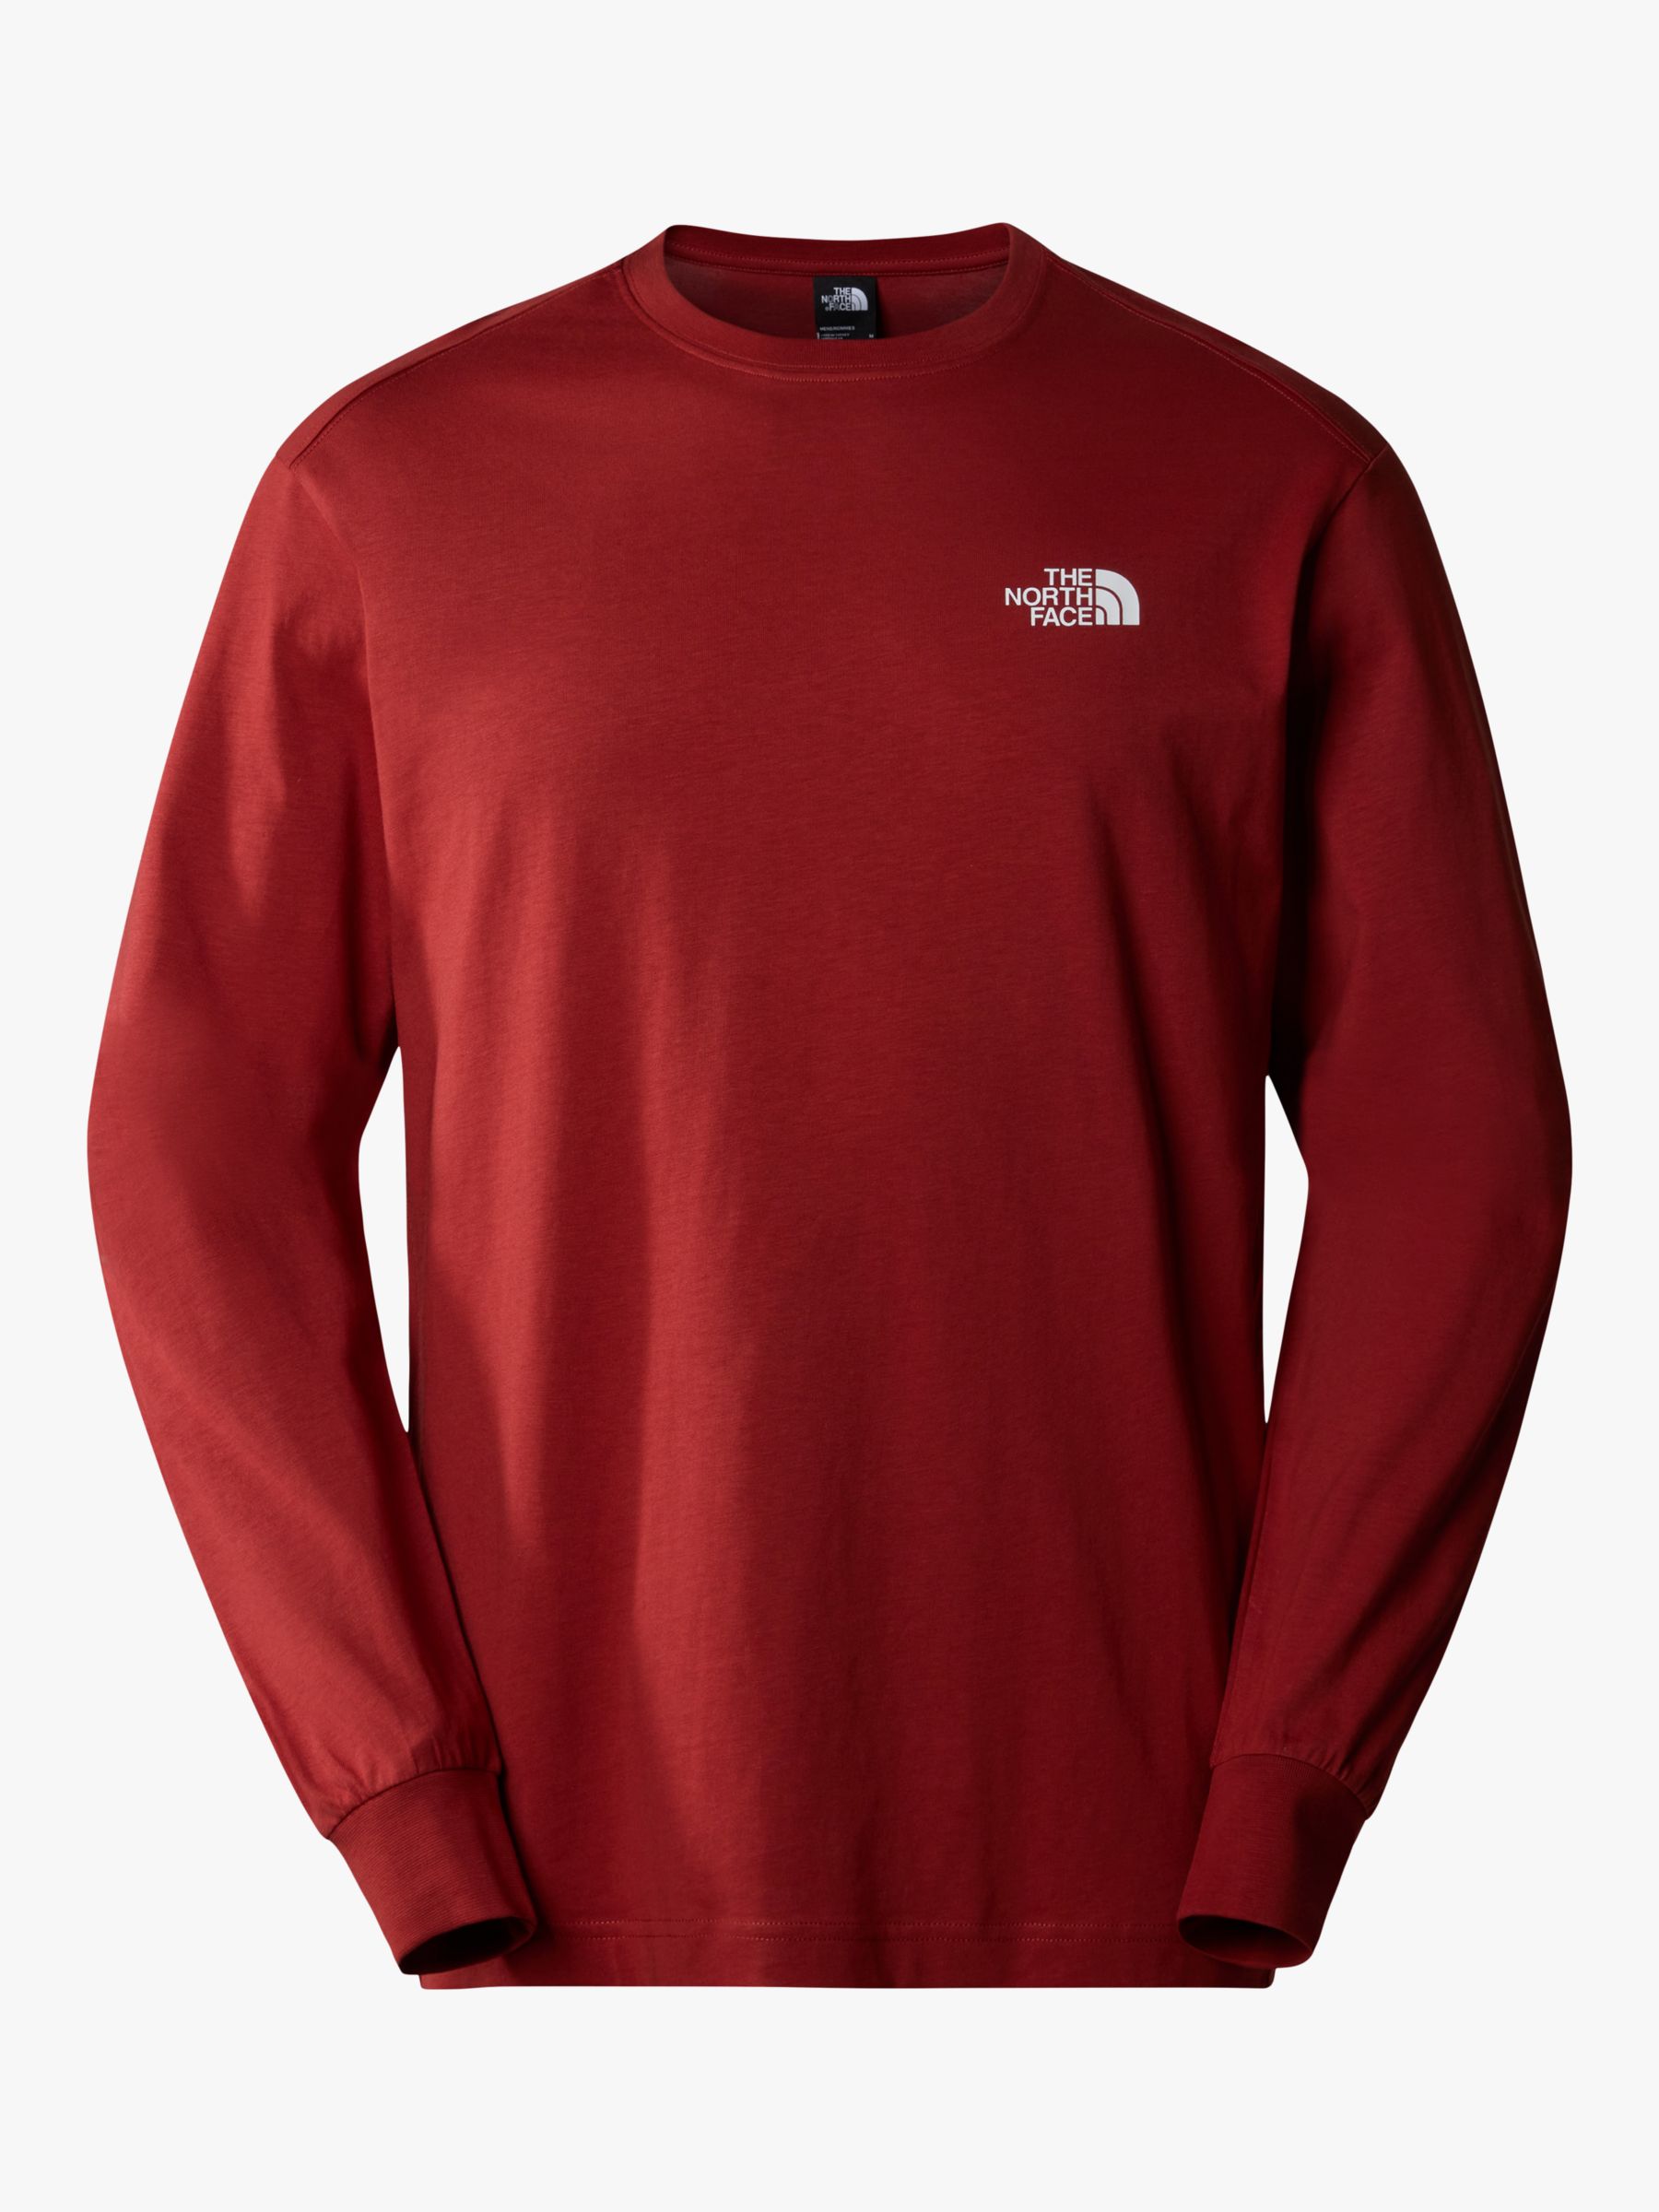 The North Face Outdoor Back Graphic T-Shirt, Iron Red, L